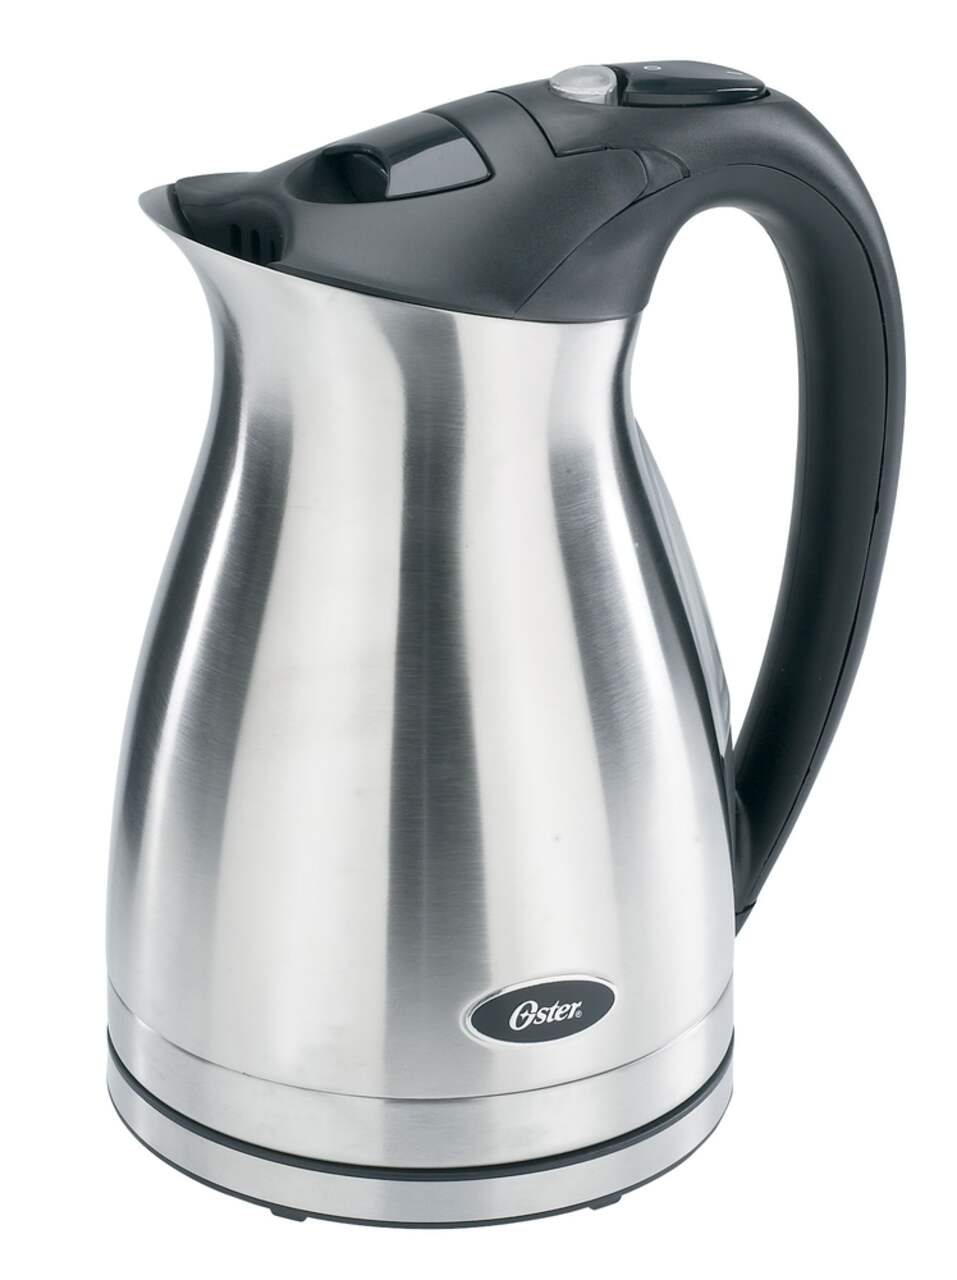 https://media-www.canadiantire.ca/product/living/kitchen/kitchen-appliances/0430243/oster-stainless-steel-360-kettle-f0b72667-6ac2-448f-b4af-73d2ddf9f317.png?imdensity=1&imwidth=640&impolicy=mZoom